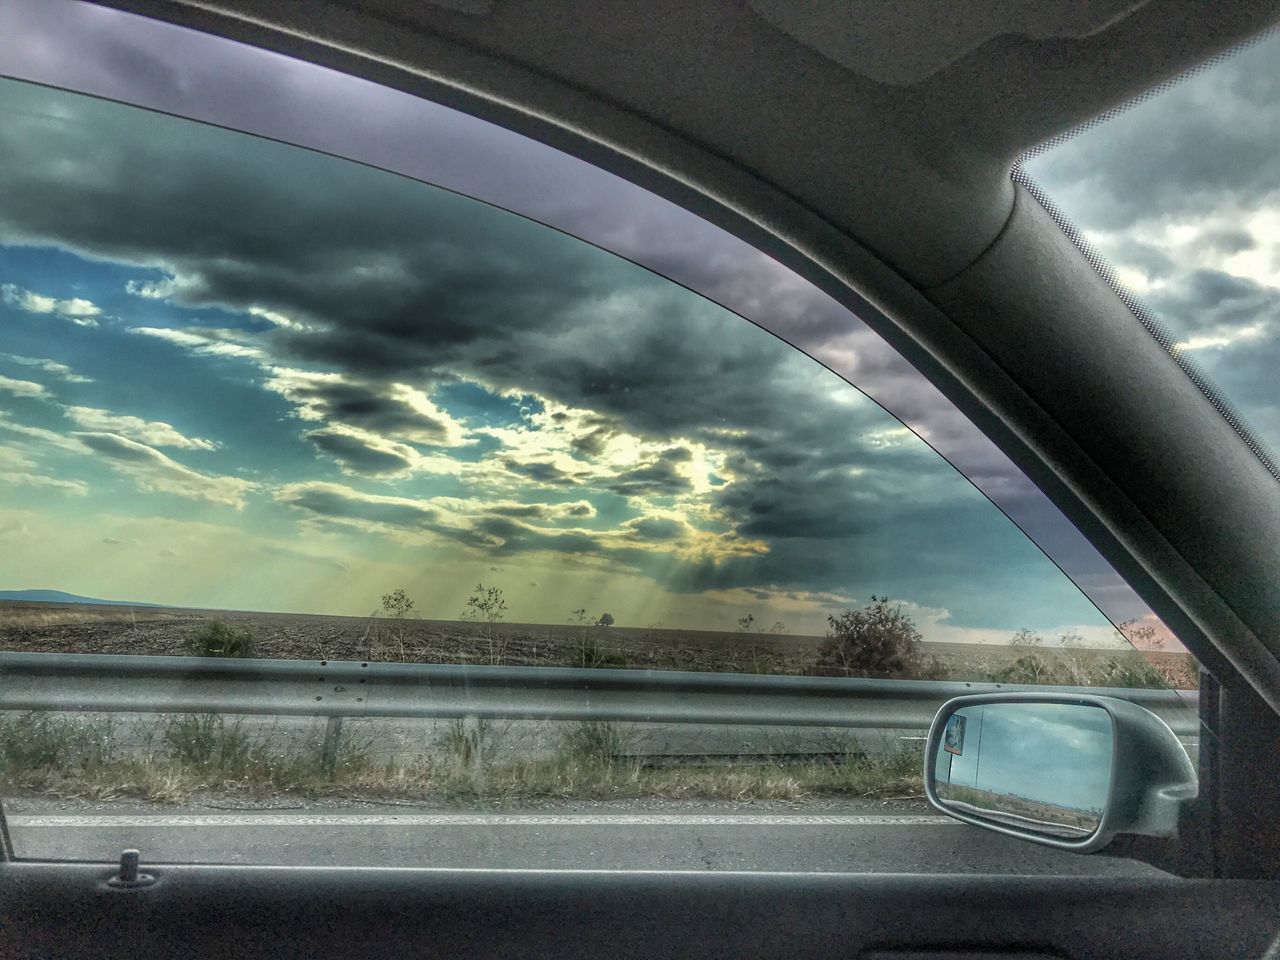 VIEW OF ROAD THROUGH CAR WINDOW